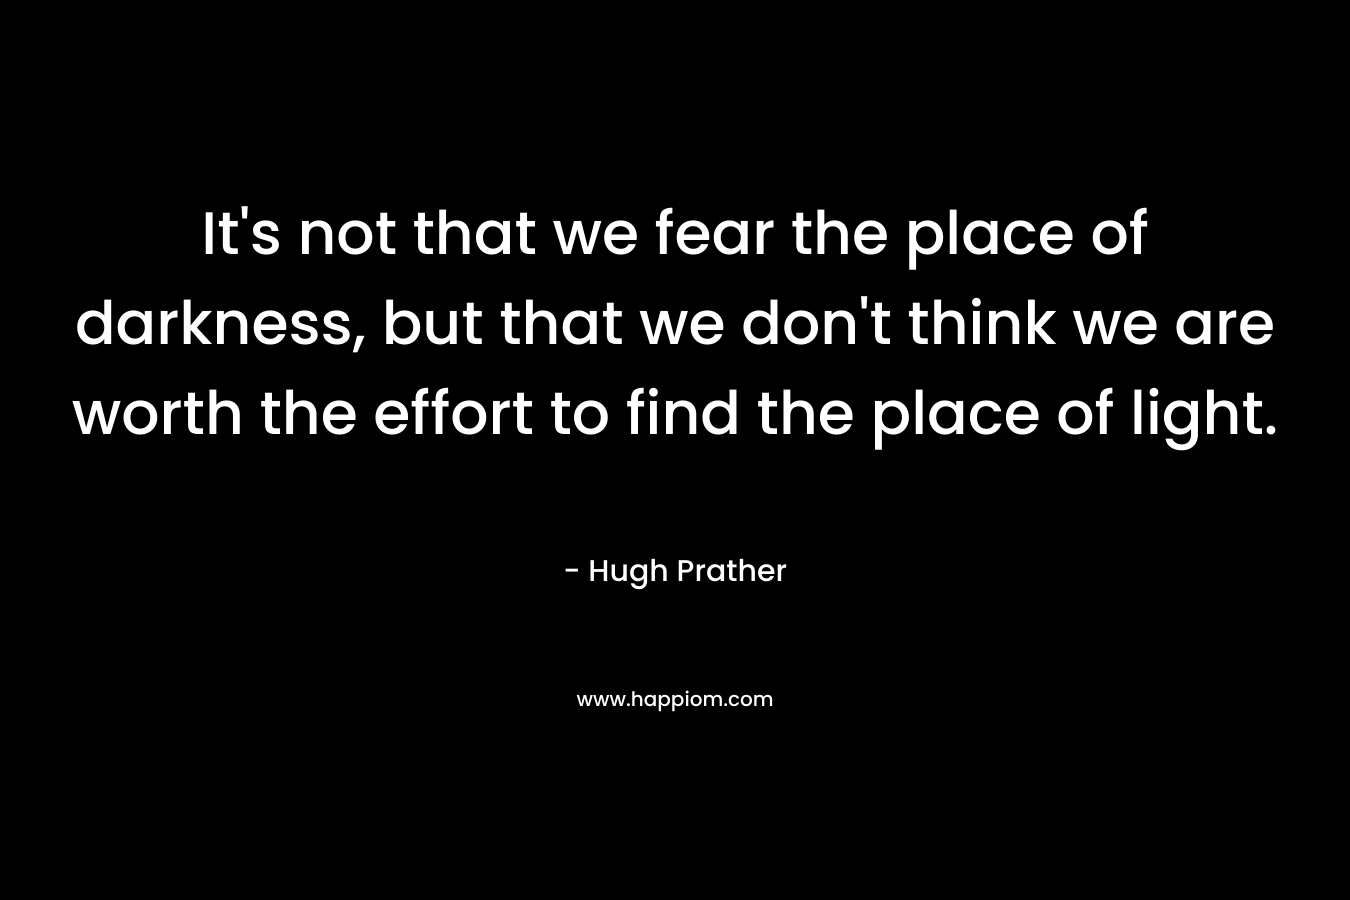 It's not that we fear the place of darkness, but that we don't think we are worth the effort to find the place of light.